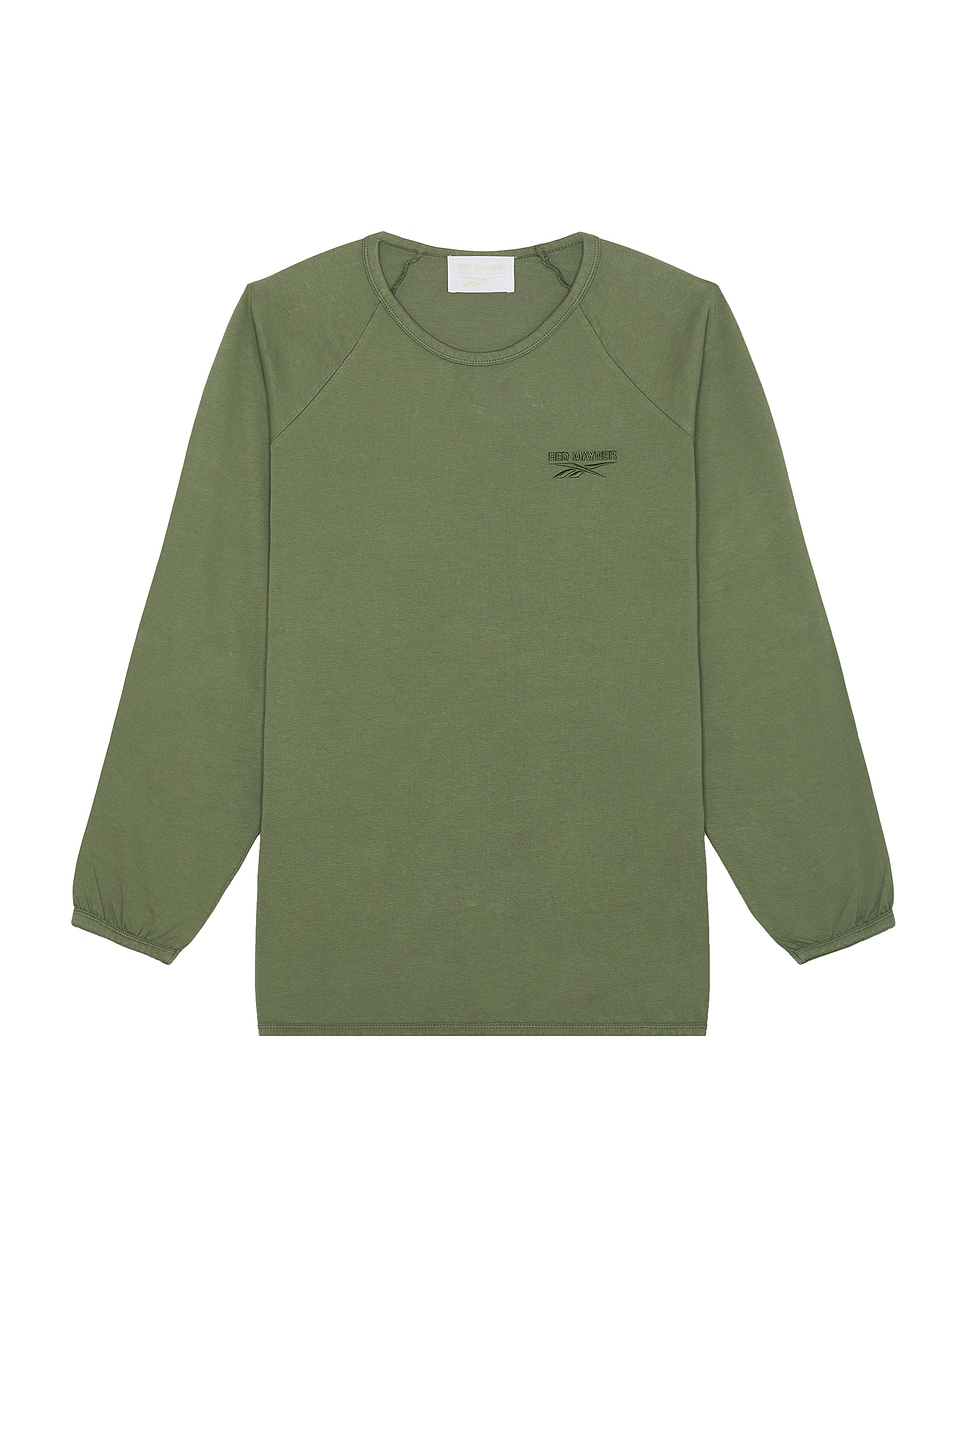 Image 1 of Reebok x Hed Mayner Long Sleeve T-shirt in Army Green